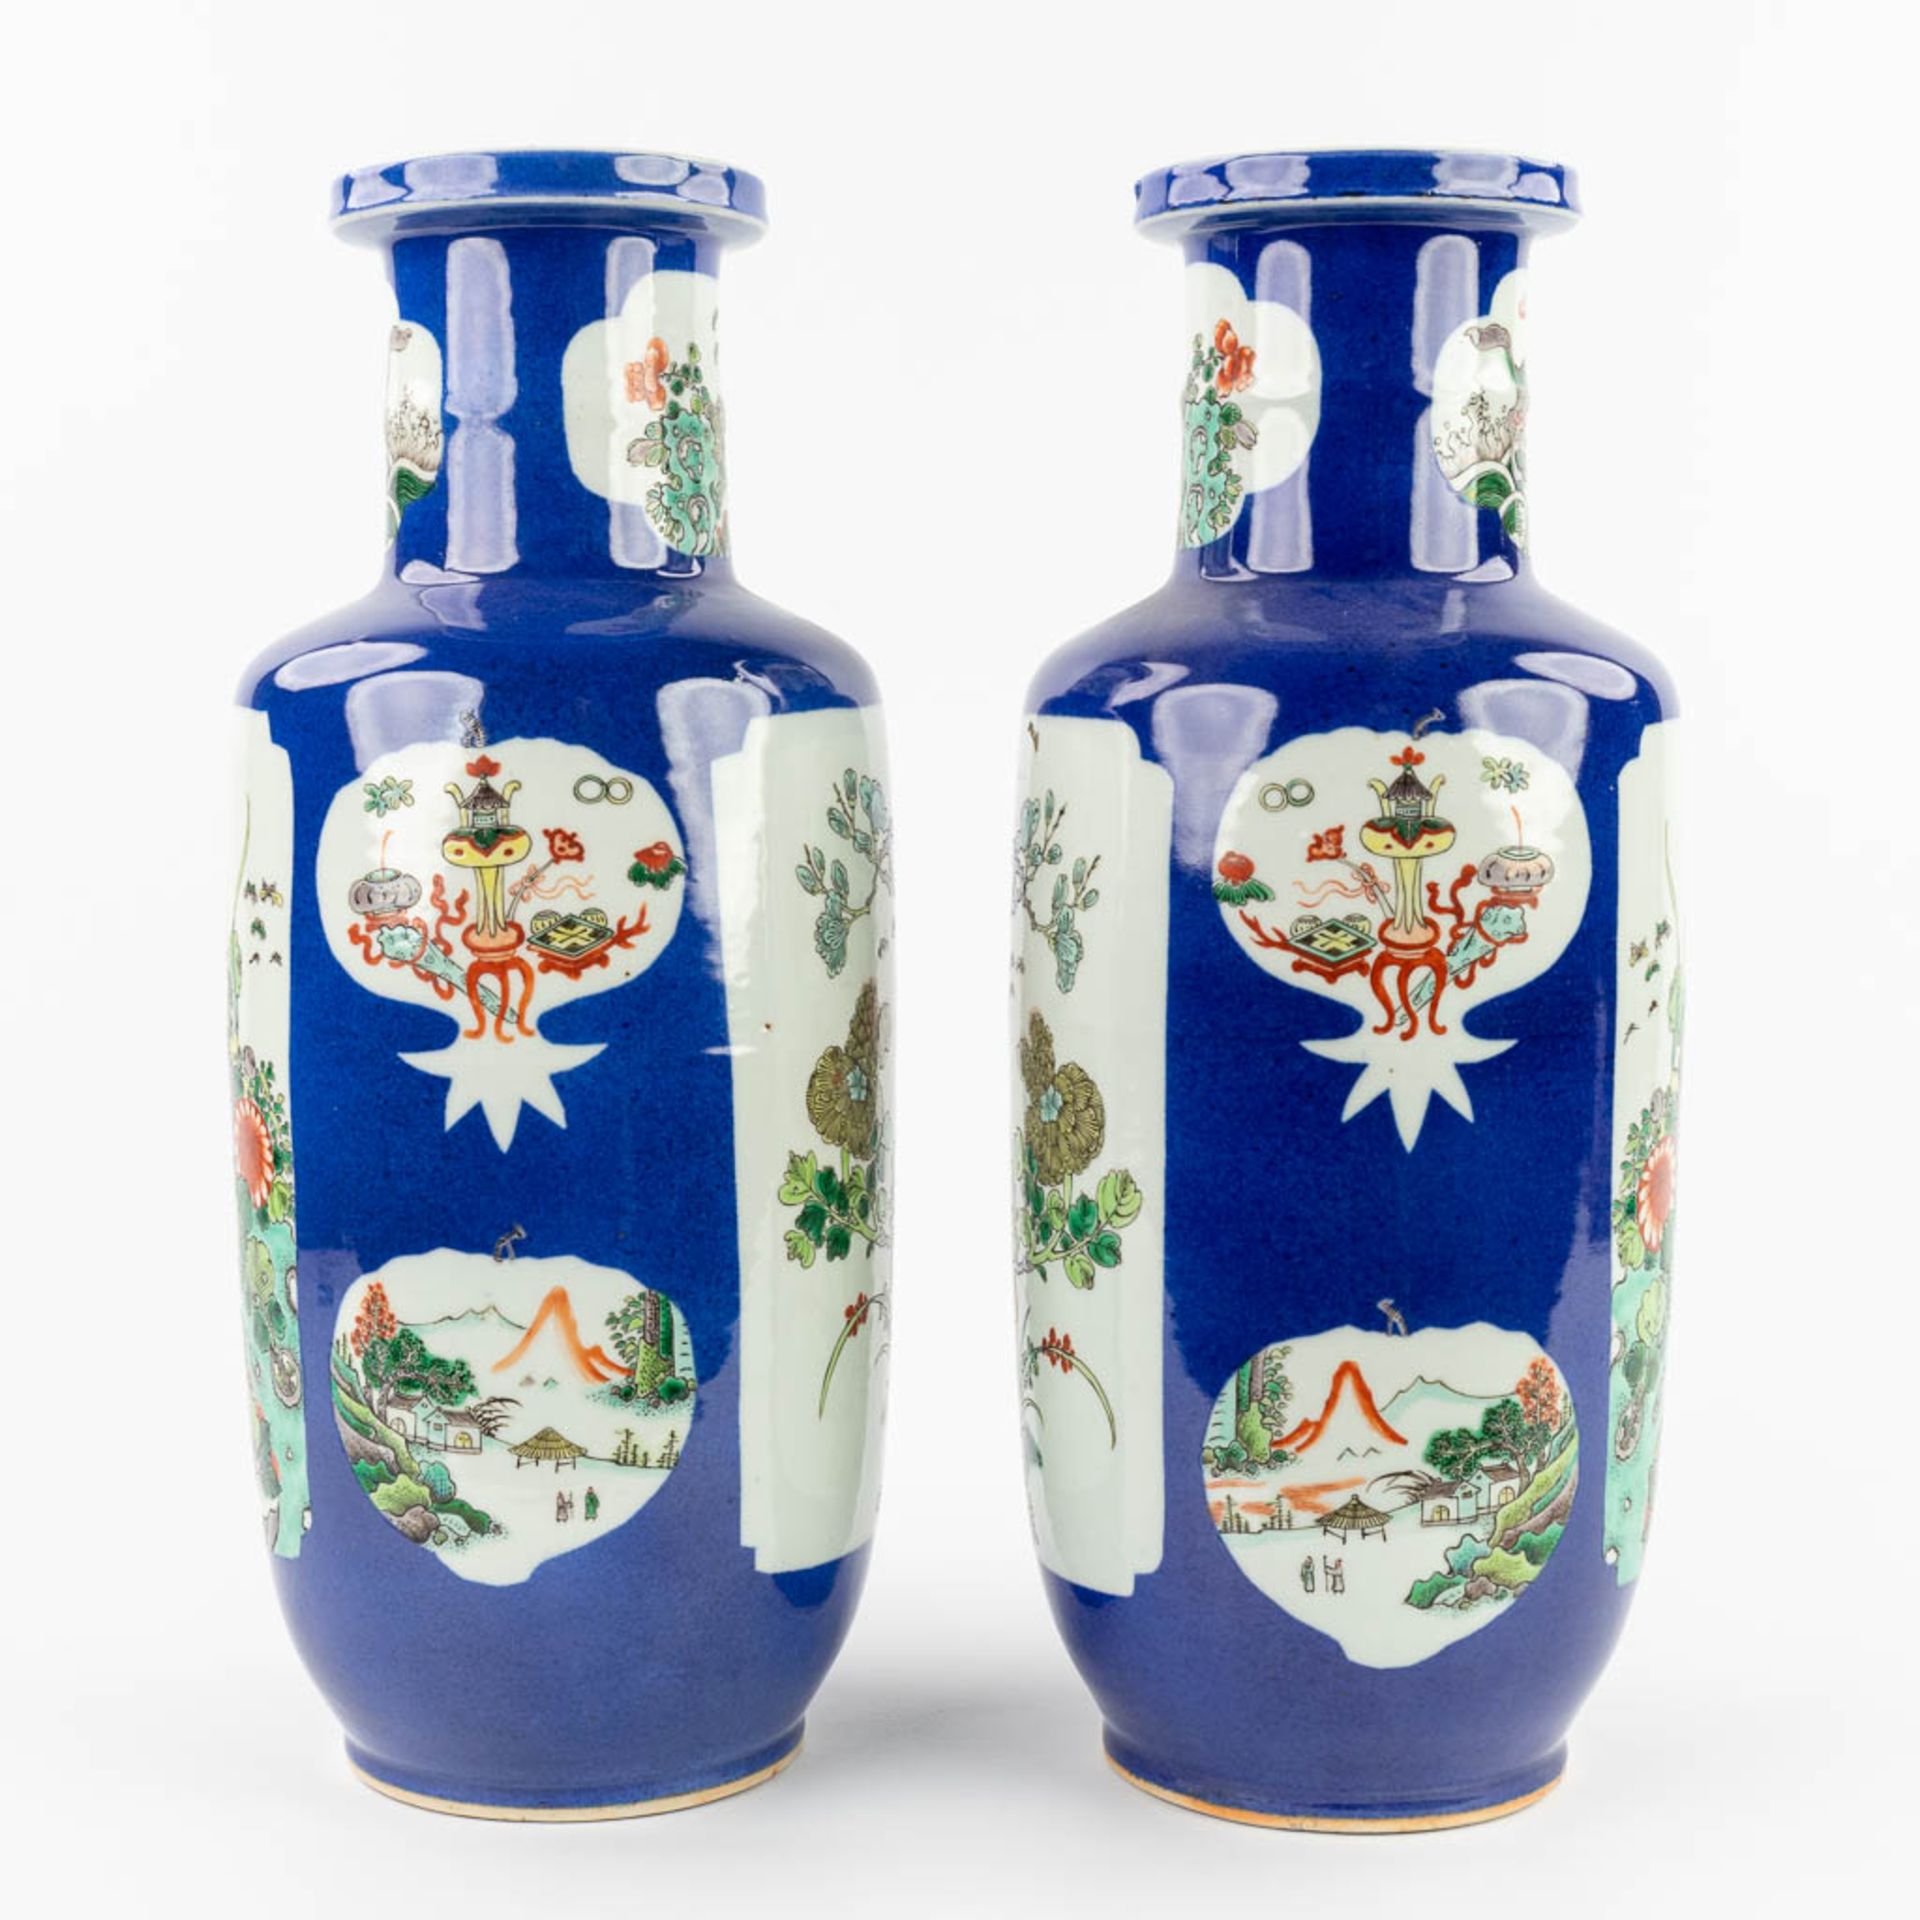 A pair of Chinese vases, decorated with fauna and flora. 20th C. (H:45 x D:18 cm) - Image 3 of 13